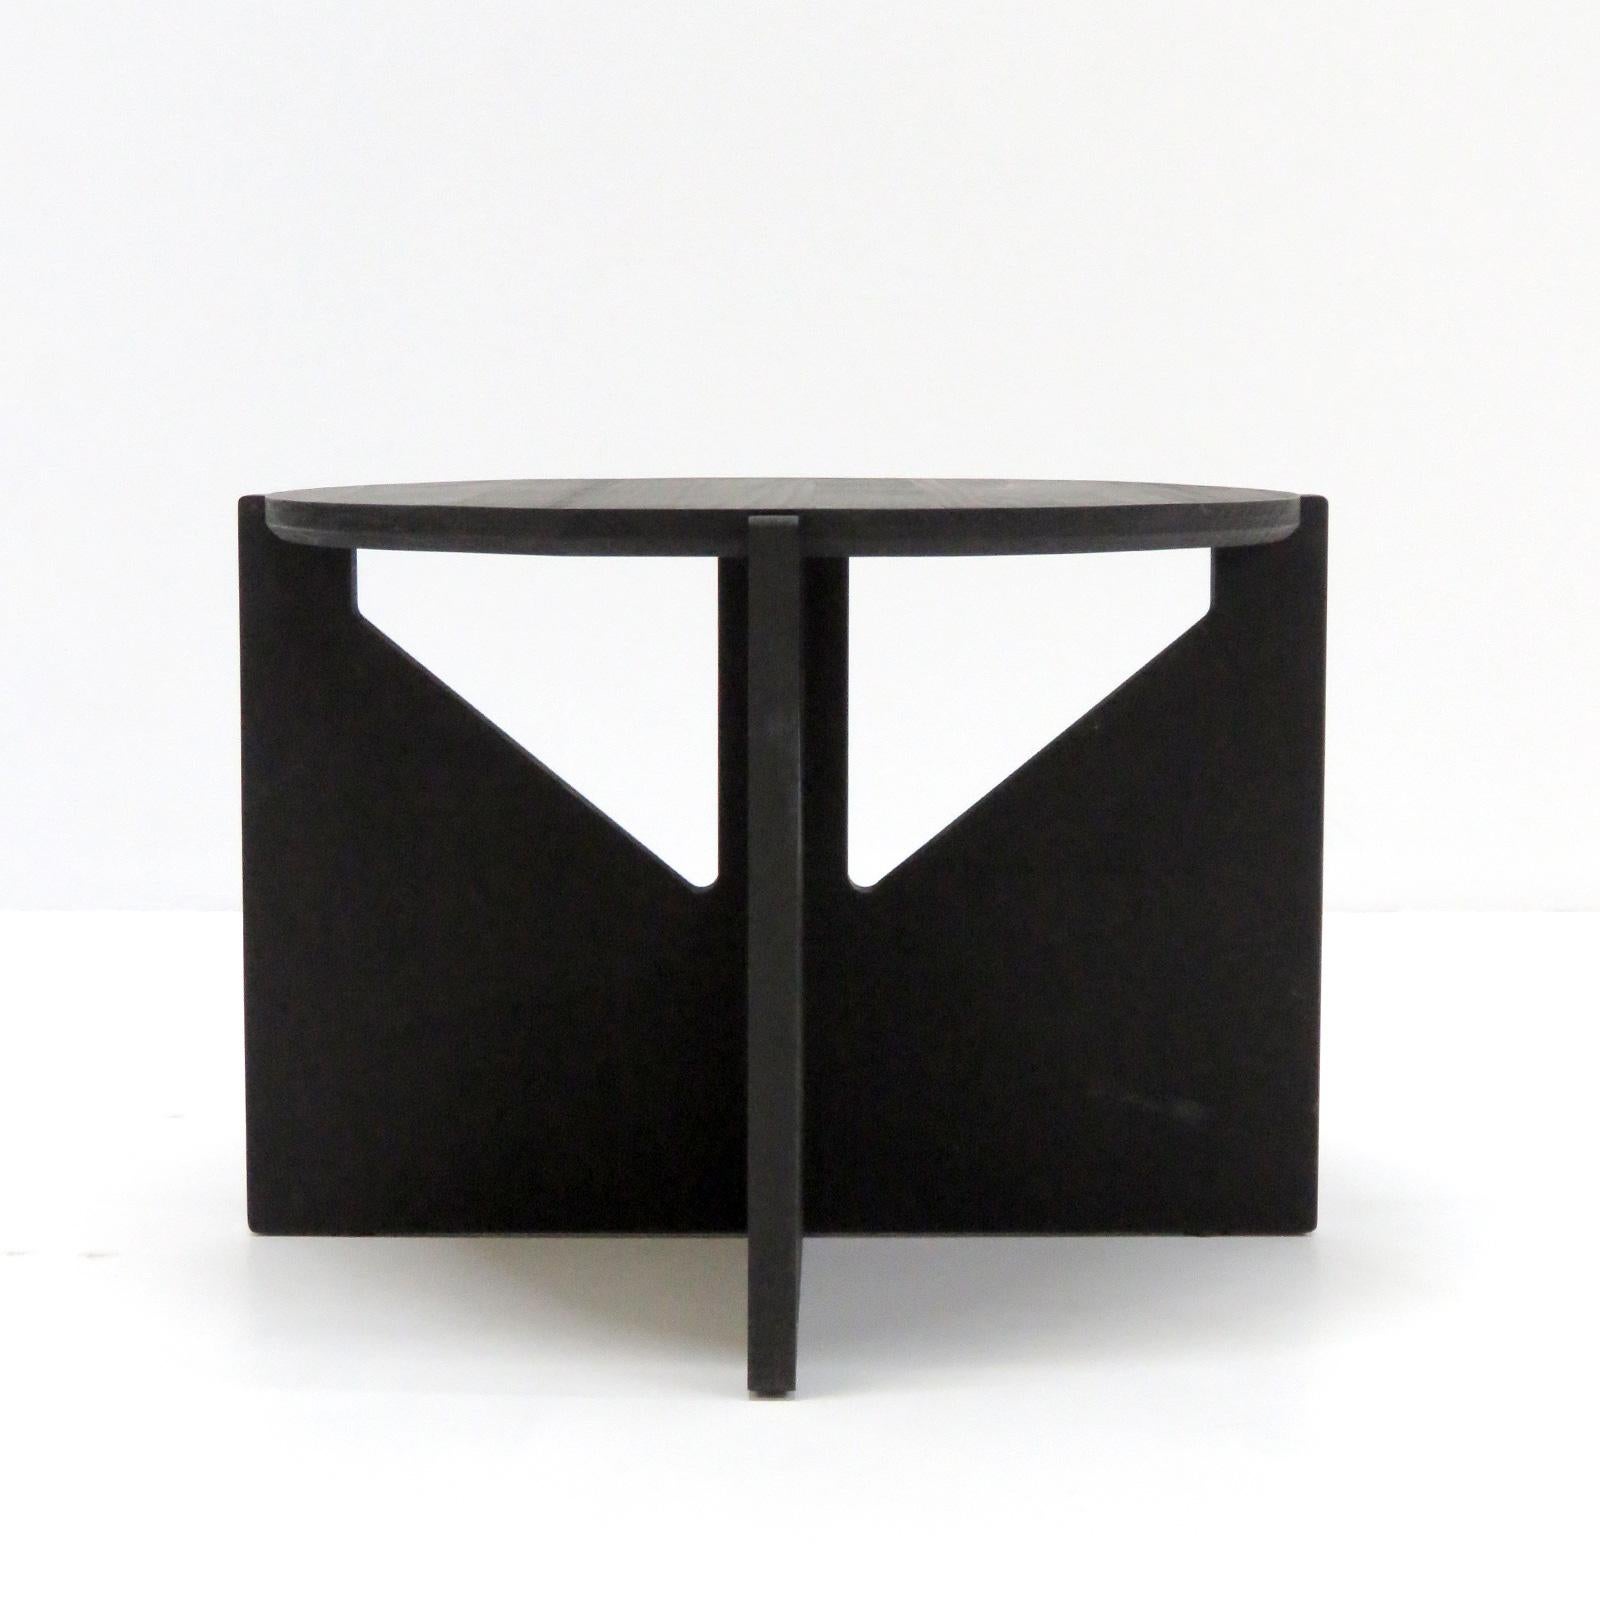 Wonderful pair of modern side tables/stools by Kristina Dam studio, Denmark in flat painted hardwood, marked.